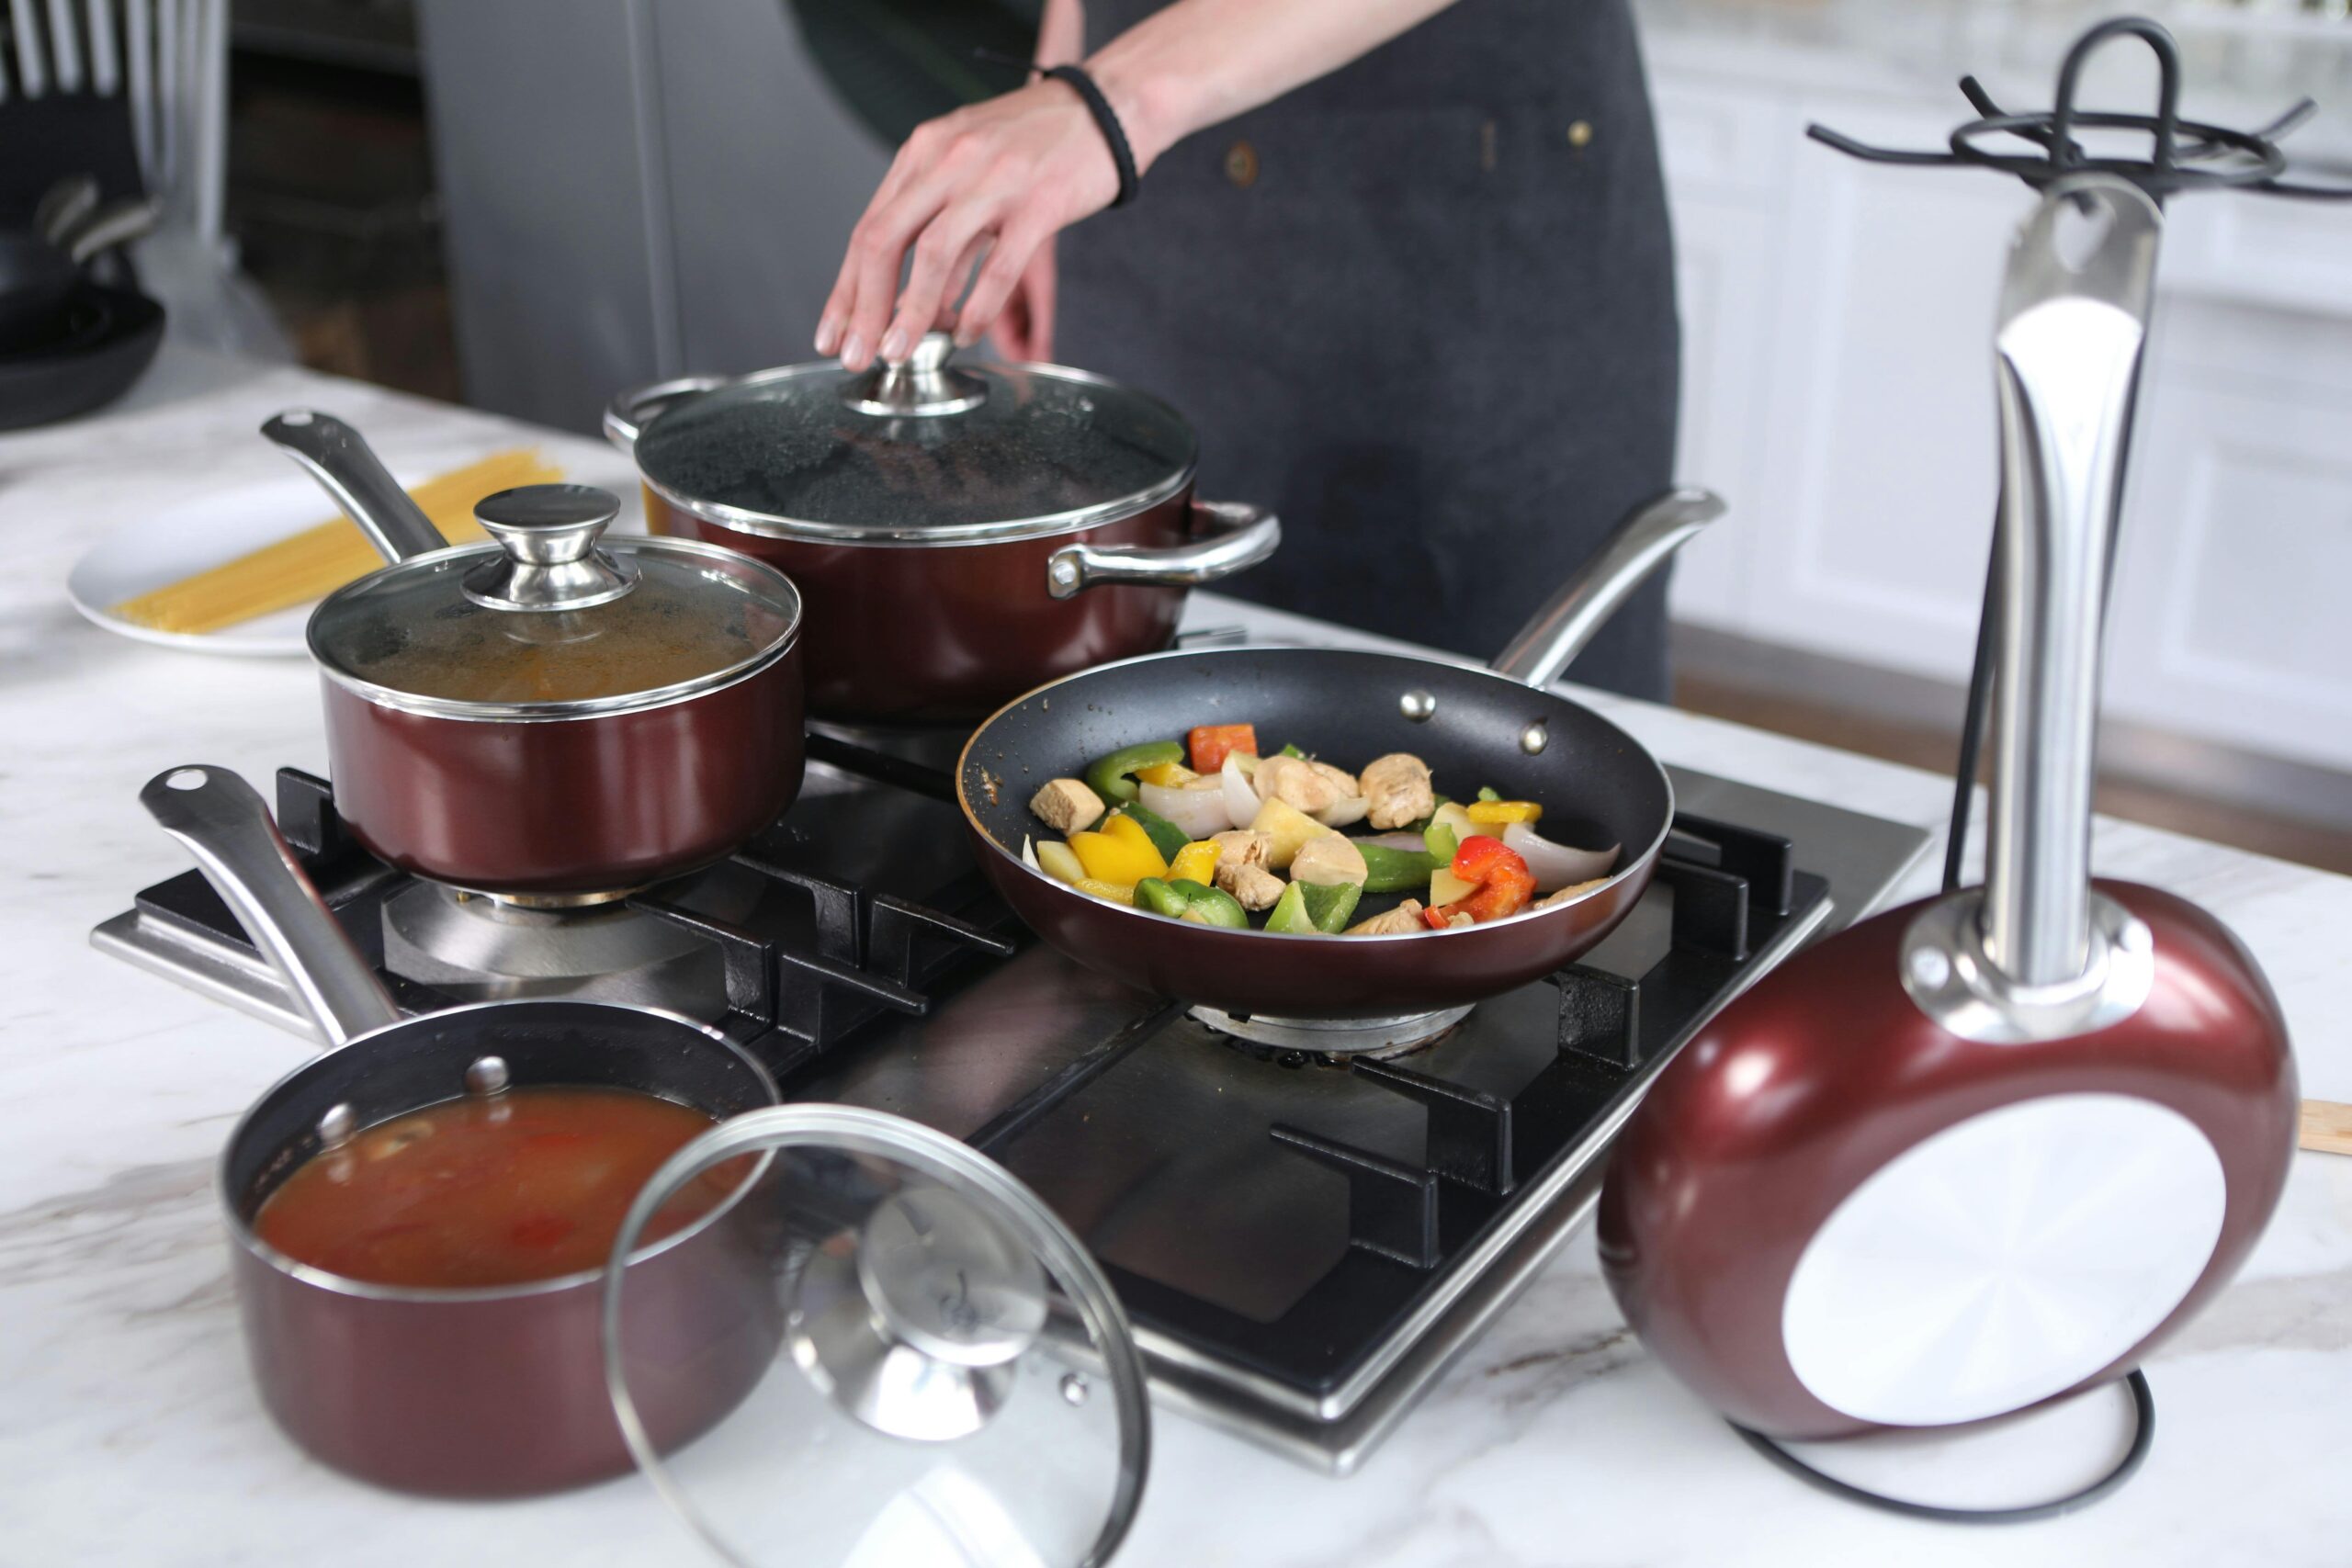 Can Masterclass Cookware Go in the Oven?